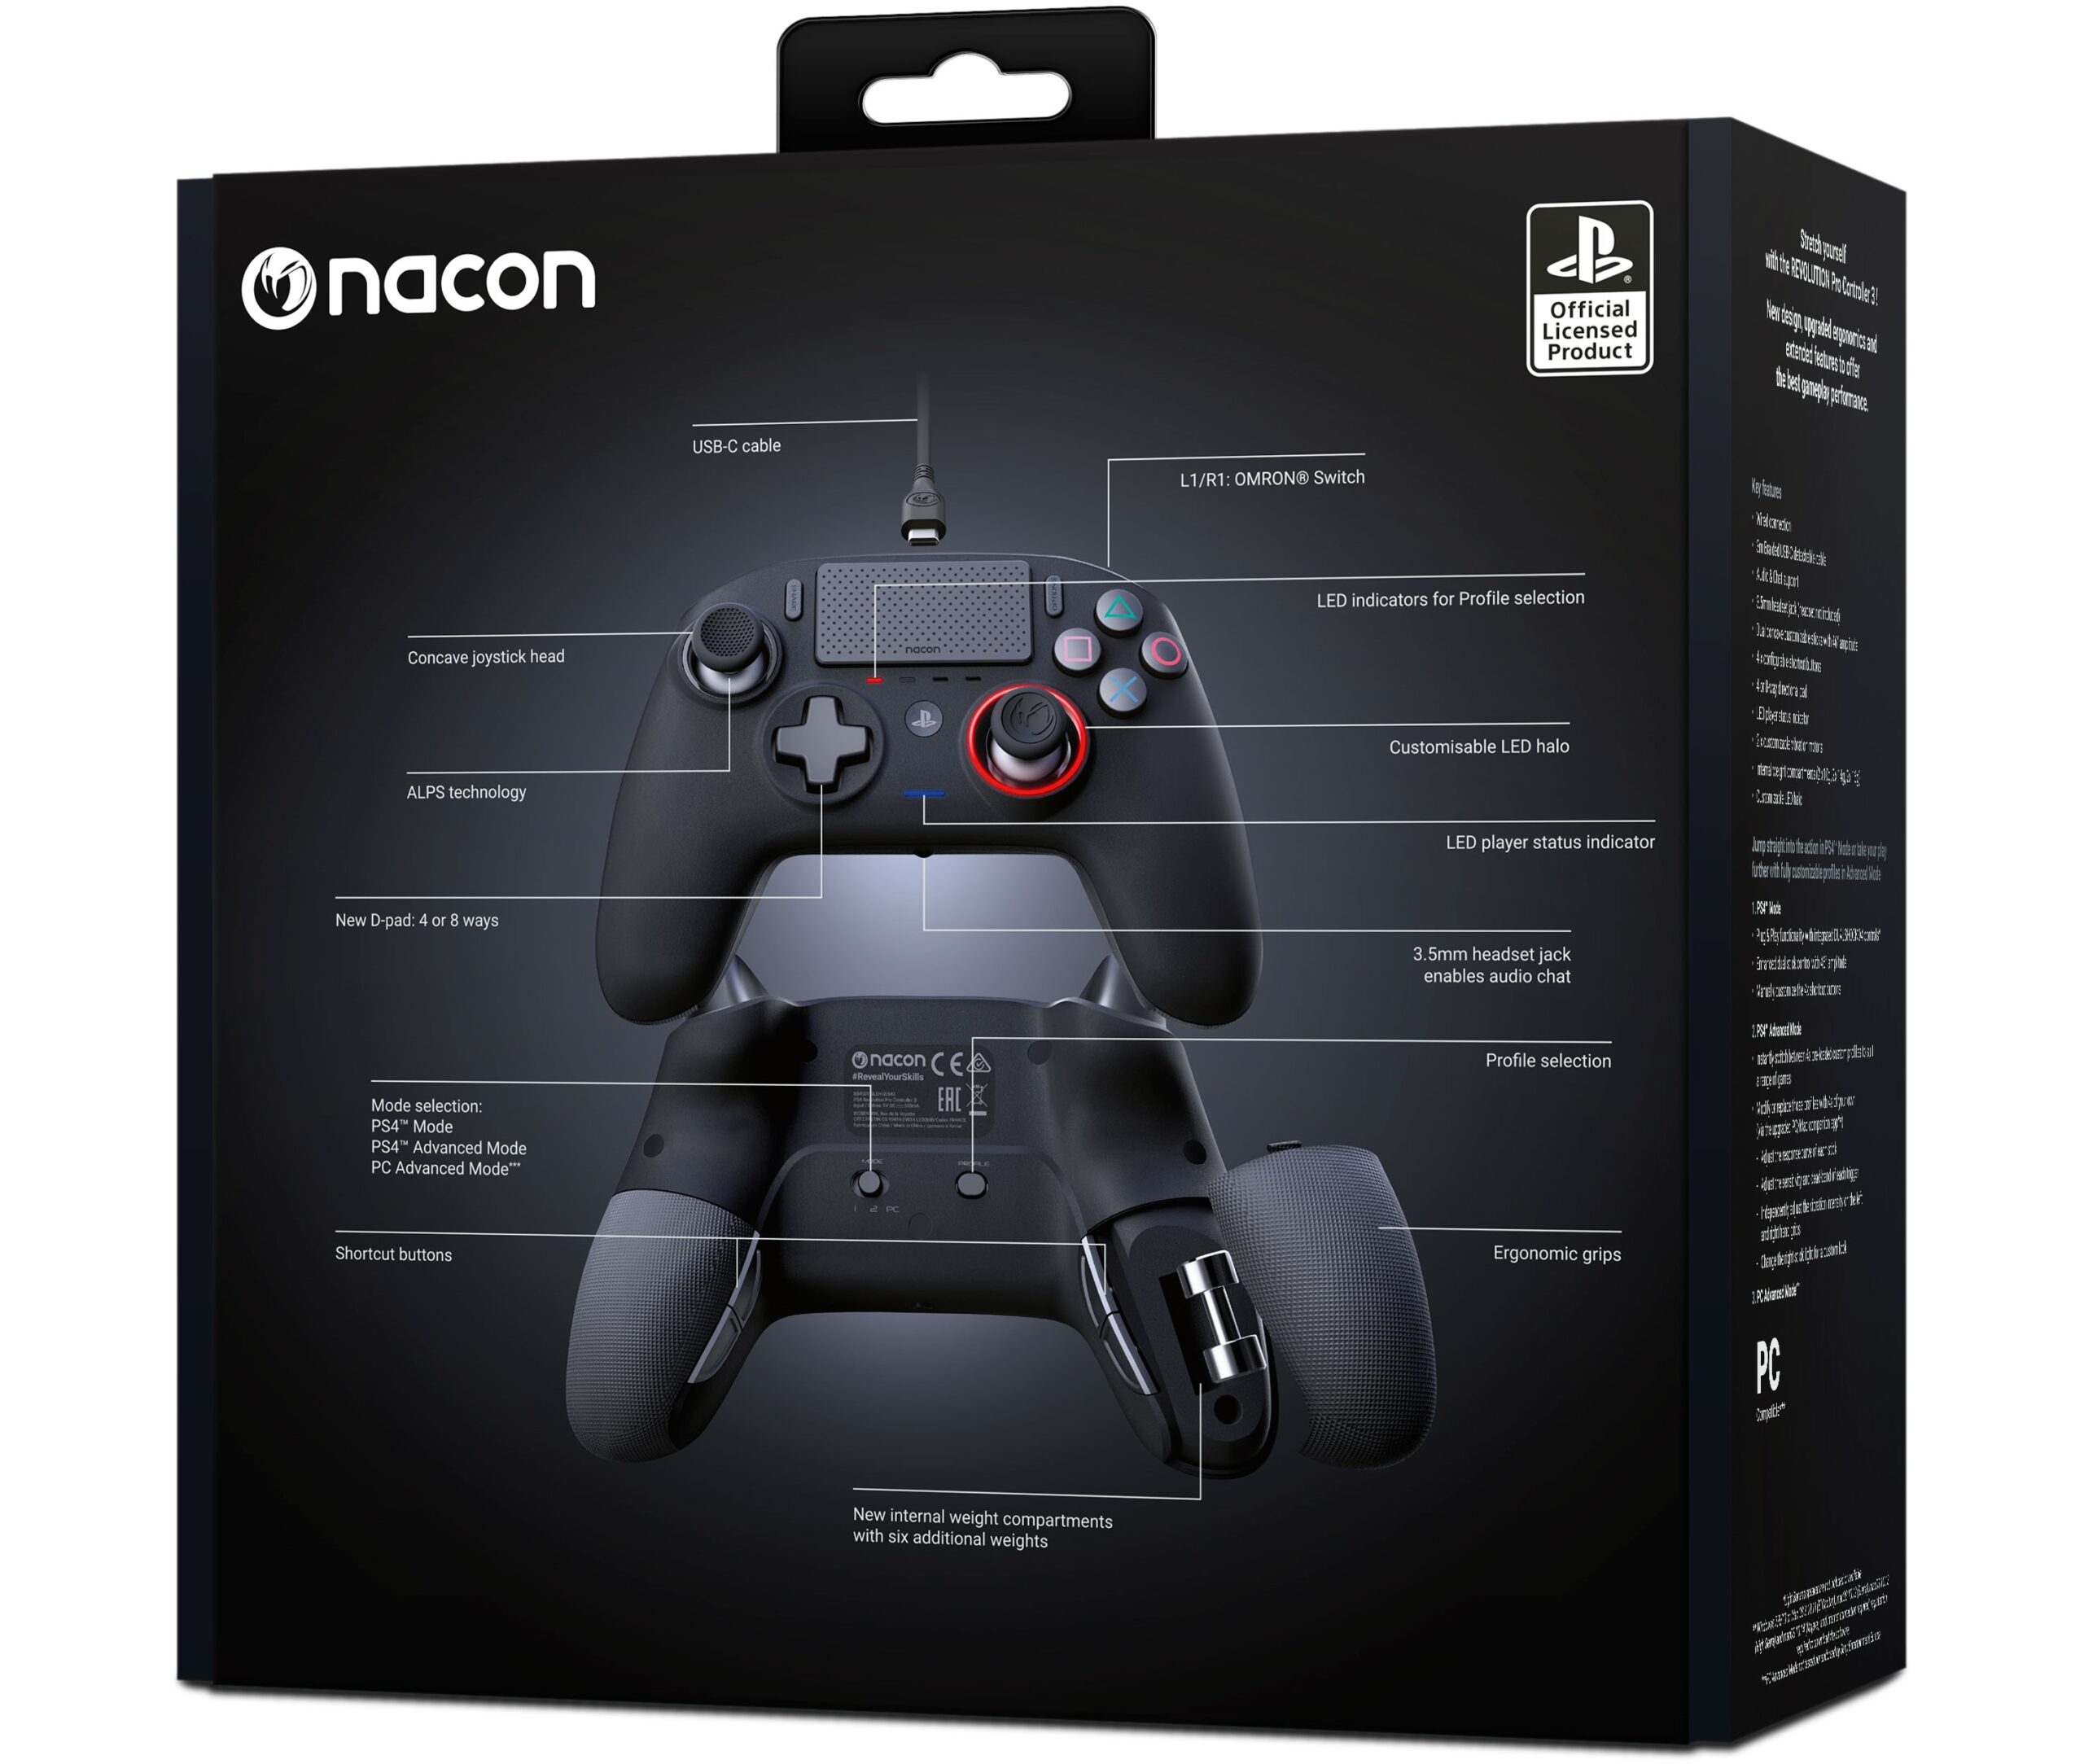 The Unbiased Review of Nacon Revolution Pro Controller 3 – “The Not So Unlimted Edition”